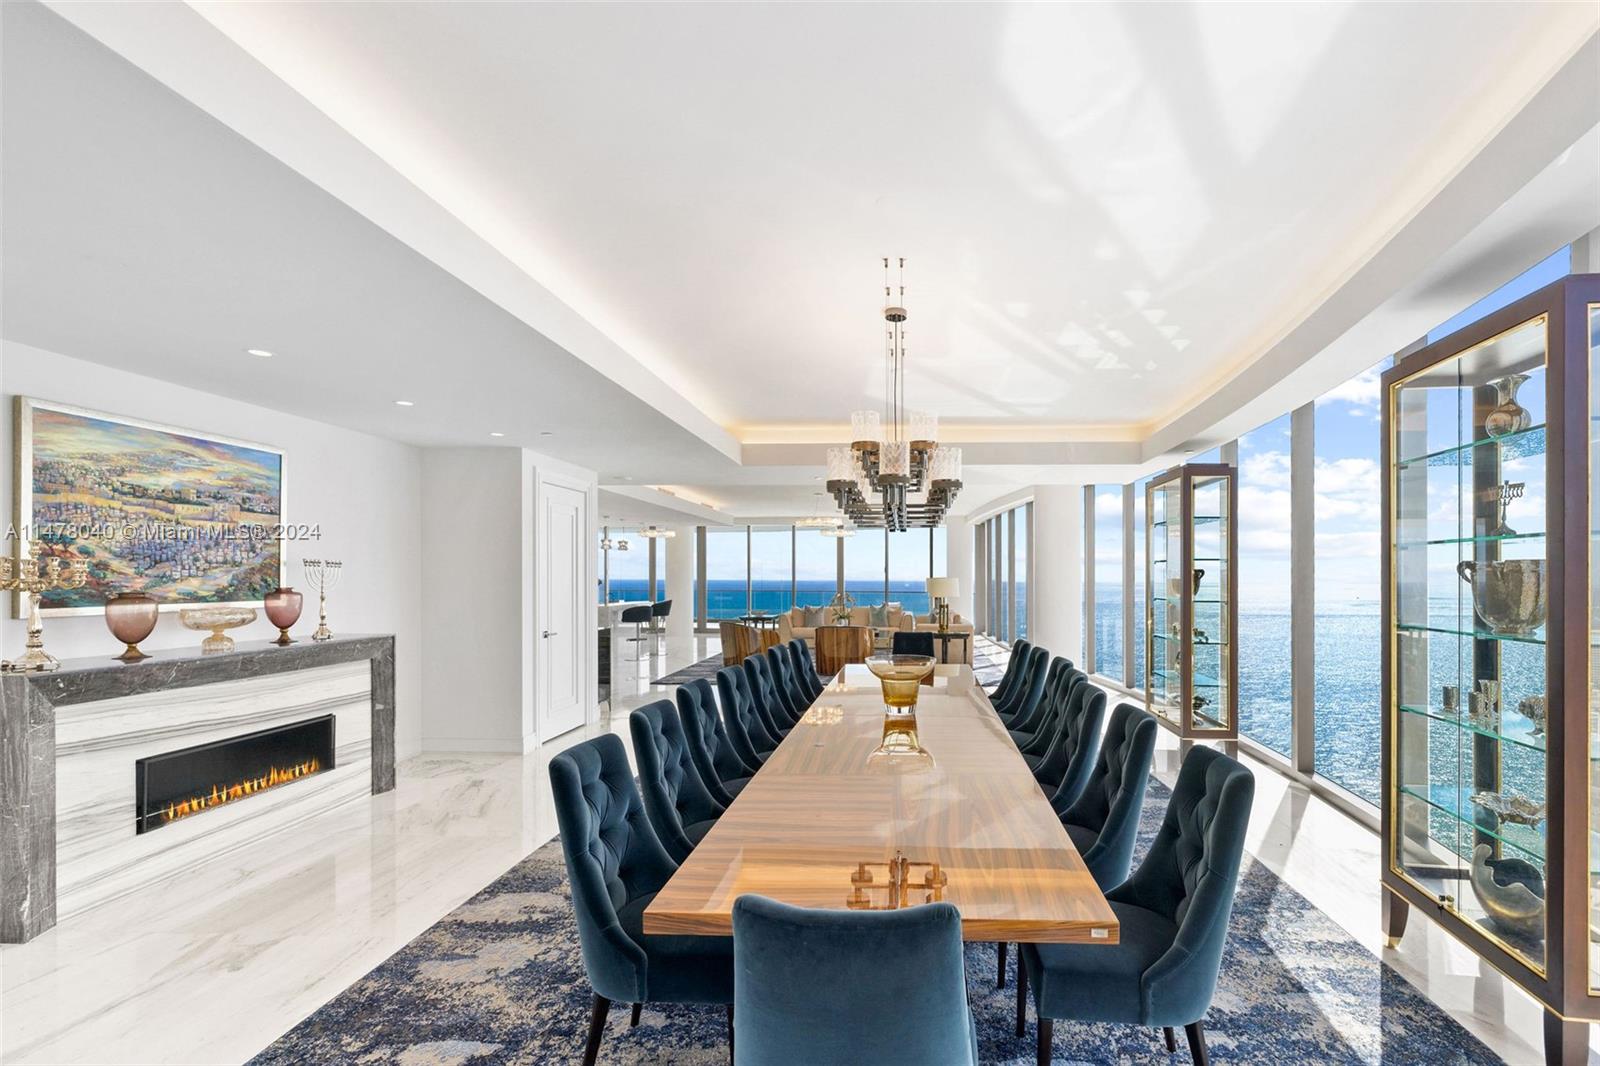 The SKY ESTATE - custom one-of-a-kind full-floor unit is a masterpiece of opulence on the 34th floor of the ultra-luxurious &amp; secure Estates at Acqualina in Sunny Isles Beach. Boasting 10 generously appointed BD &amp; 13 lavishly designed onyx &amp; marble BA, meticulously crafted to cater to those who seek the pinnacle of coastal oceanfront living in a full-floor plan designed to ensure utmost privacy &amp; comfort. Primary Suite encompasses the bedroom, substantial bathroom inc 2 showers, 2 lavatories, dry sauna, her closet w ocean views, his closet, sound-insulated music room &amp; an office, both opening onto large ocean-front-facing terrace. Guest Suite facing west features a Living/Dining area w a high-end kitchen, completed at the same level of quality, inc swimming pool on the west-facing terrace.